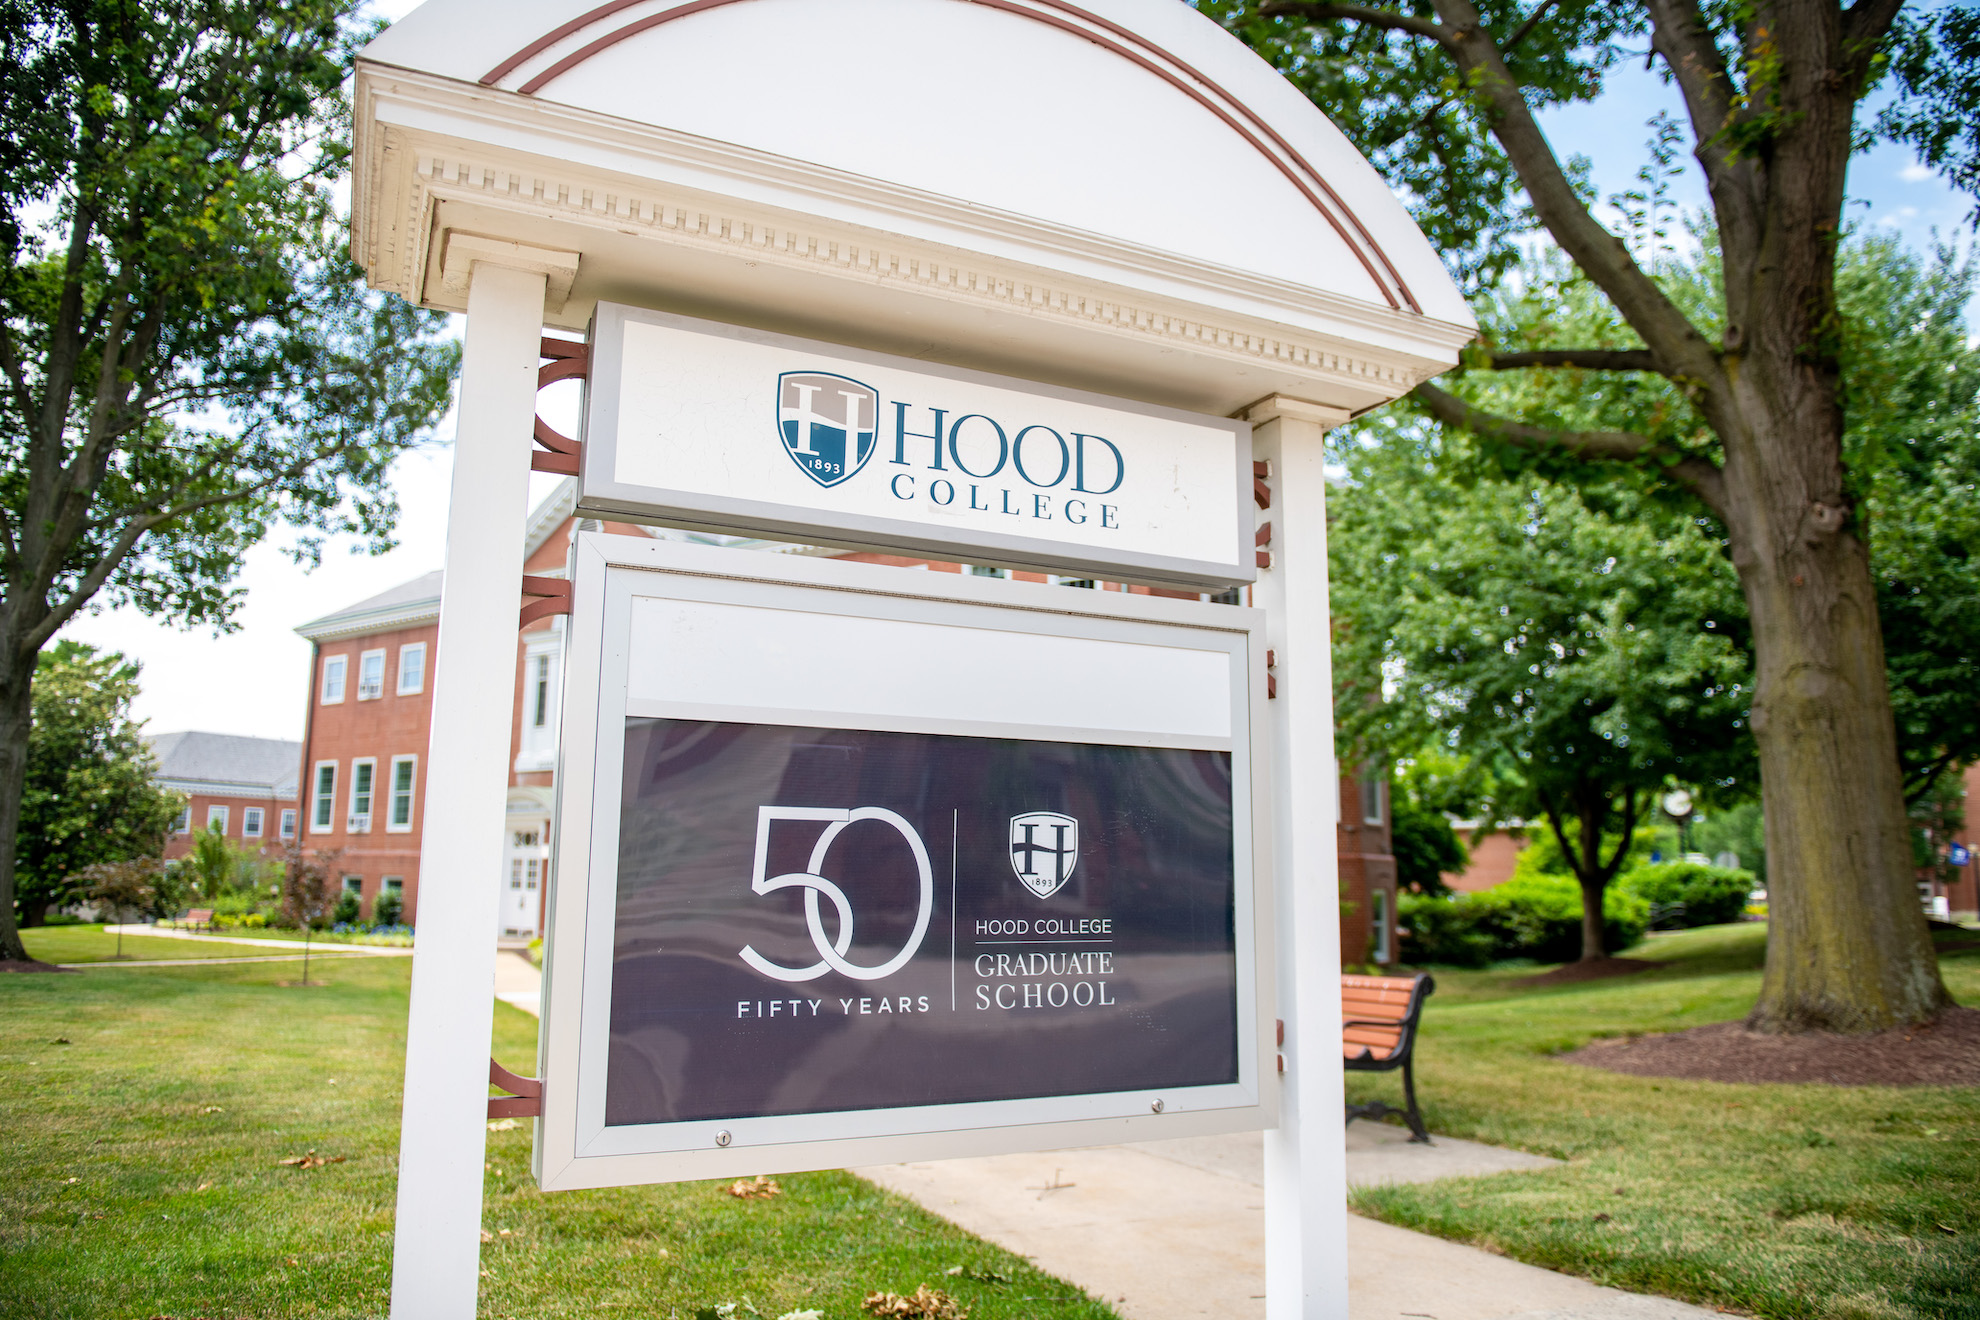 A kiosk outside of the Apple Building on Hood's campus. Inside the kiosk, a poster celebrates Hood College Graduate School's 50th anniversary